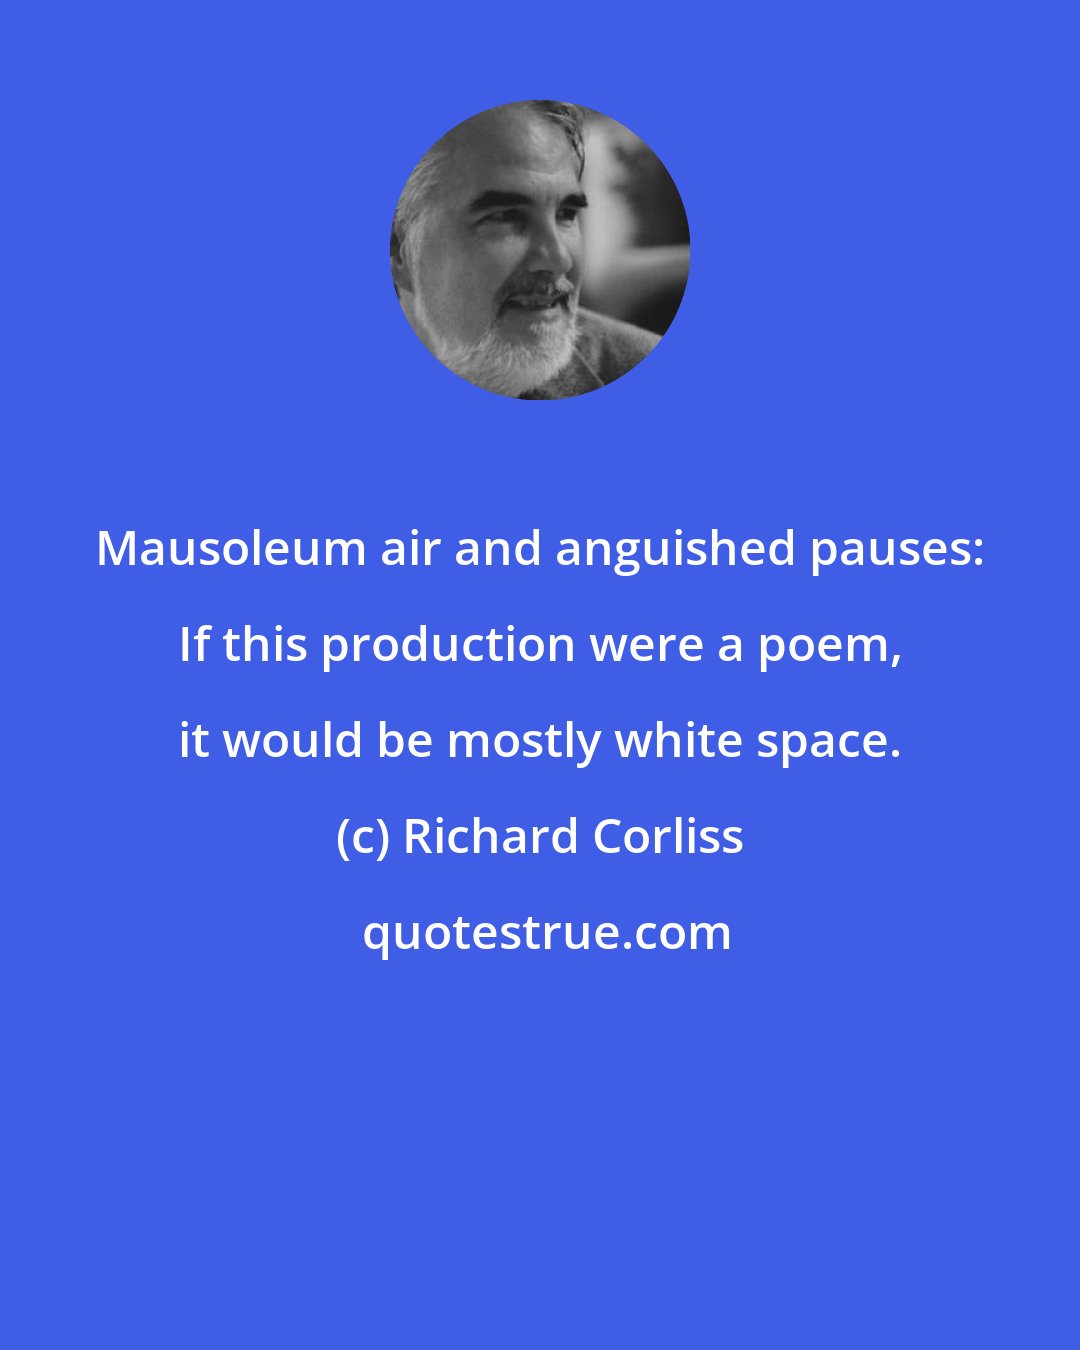 Richard Corliss: Mausoleum air and anguished pauses: If this production were a poem, it would be mostly white space.